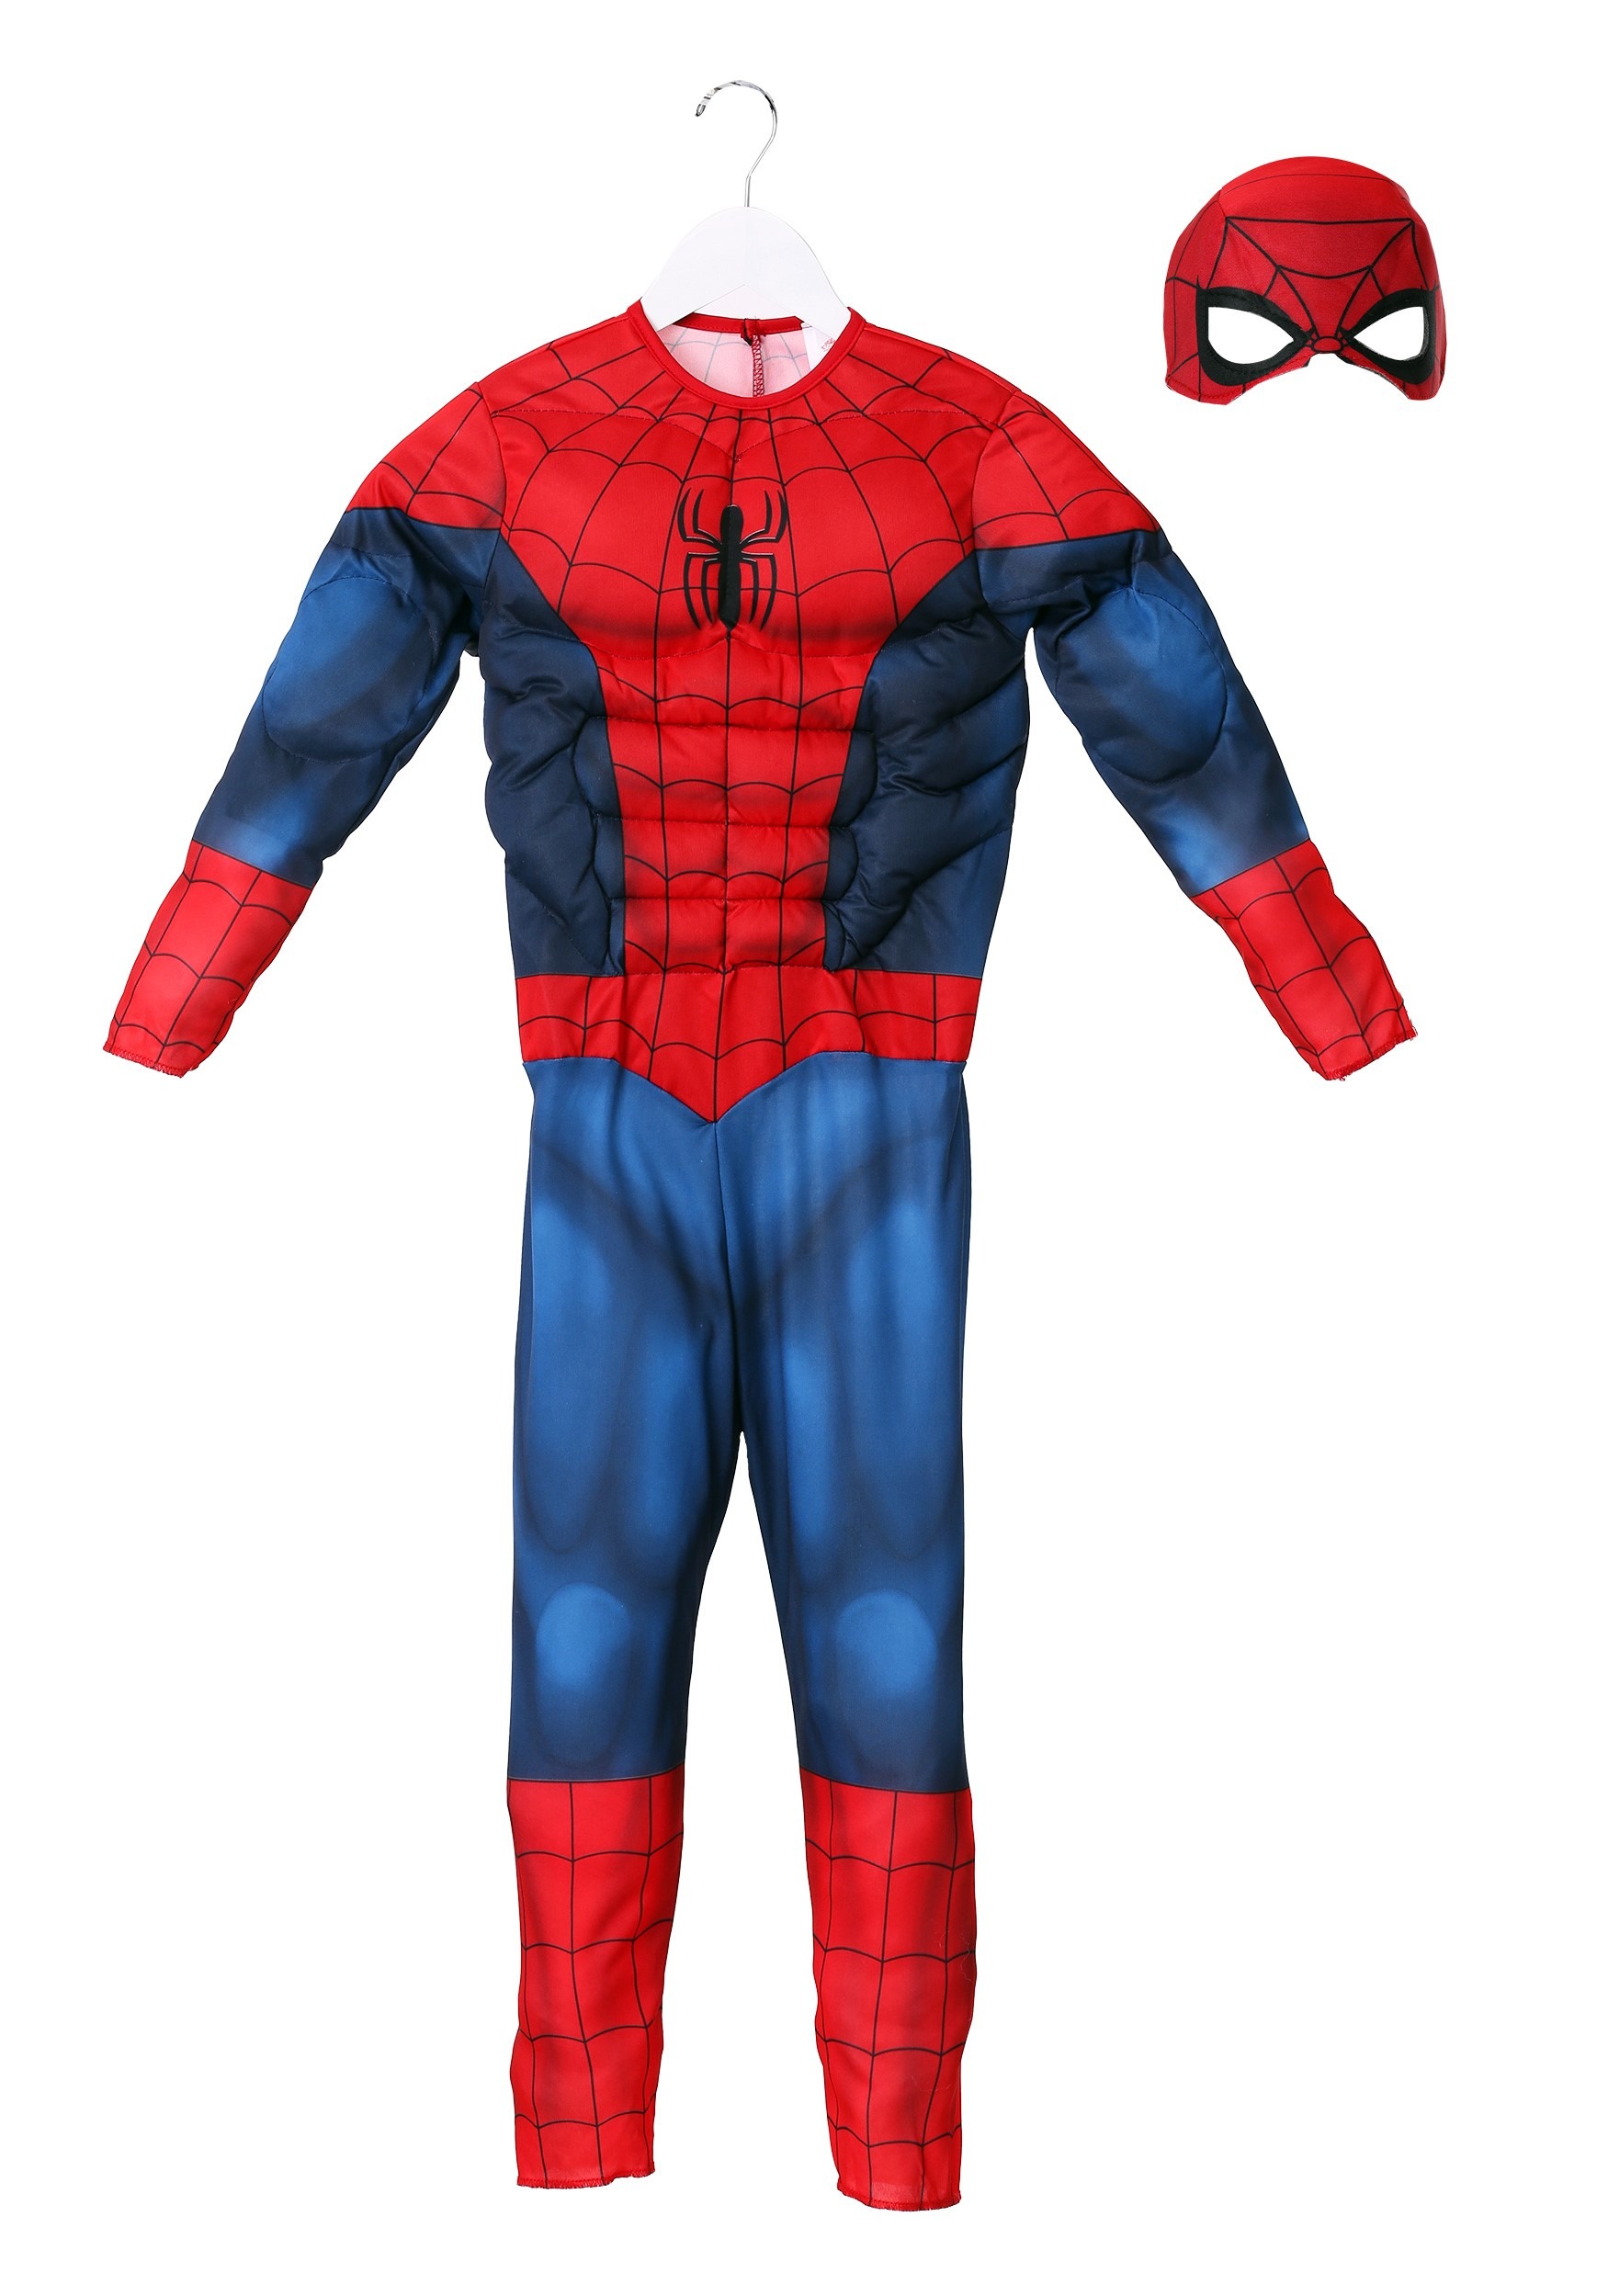 Suit Yourself Classic Spider-Man Muscle Halloween Costume for Toddler Boys Includes Headpiece 3-4T